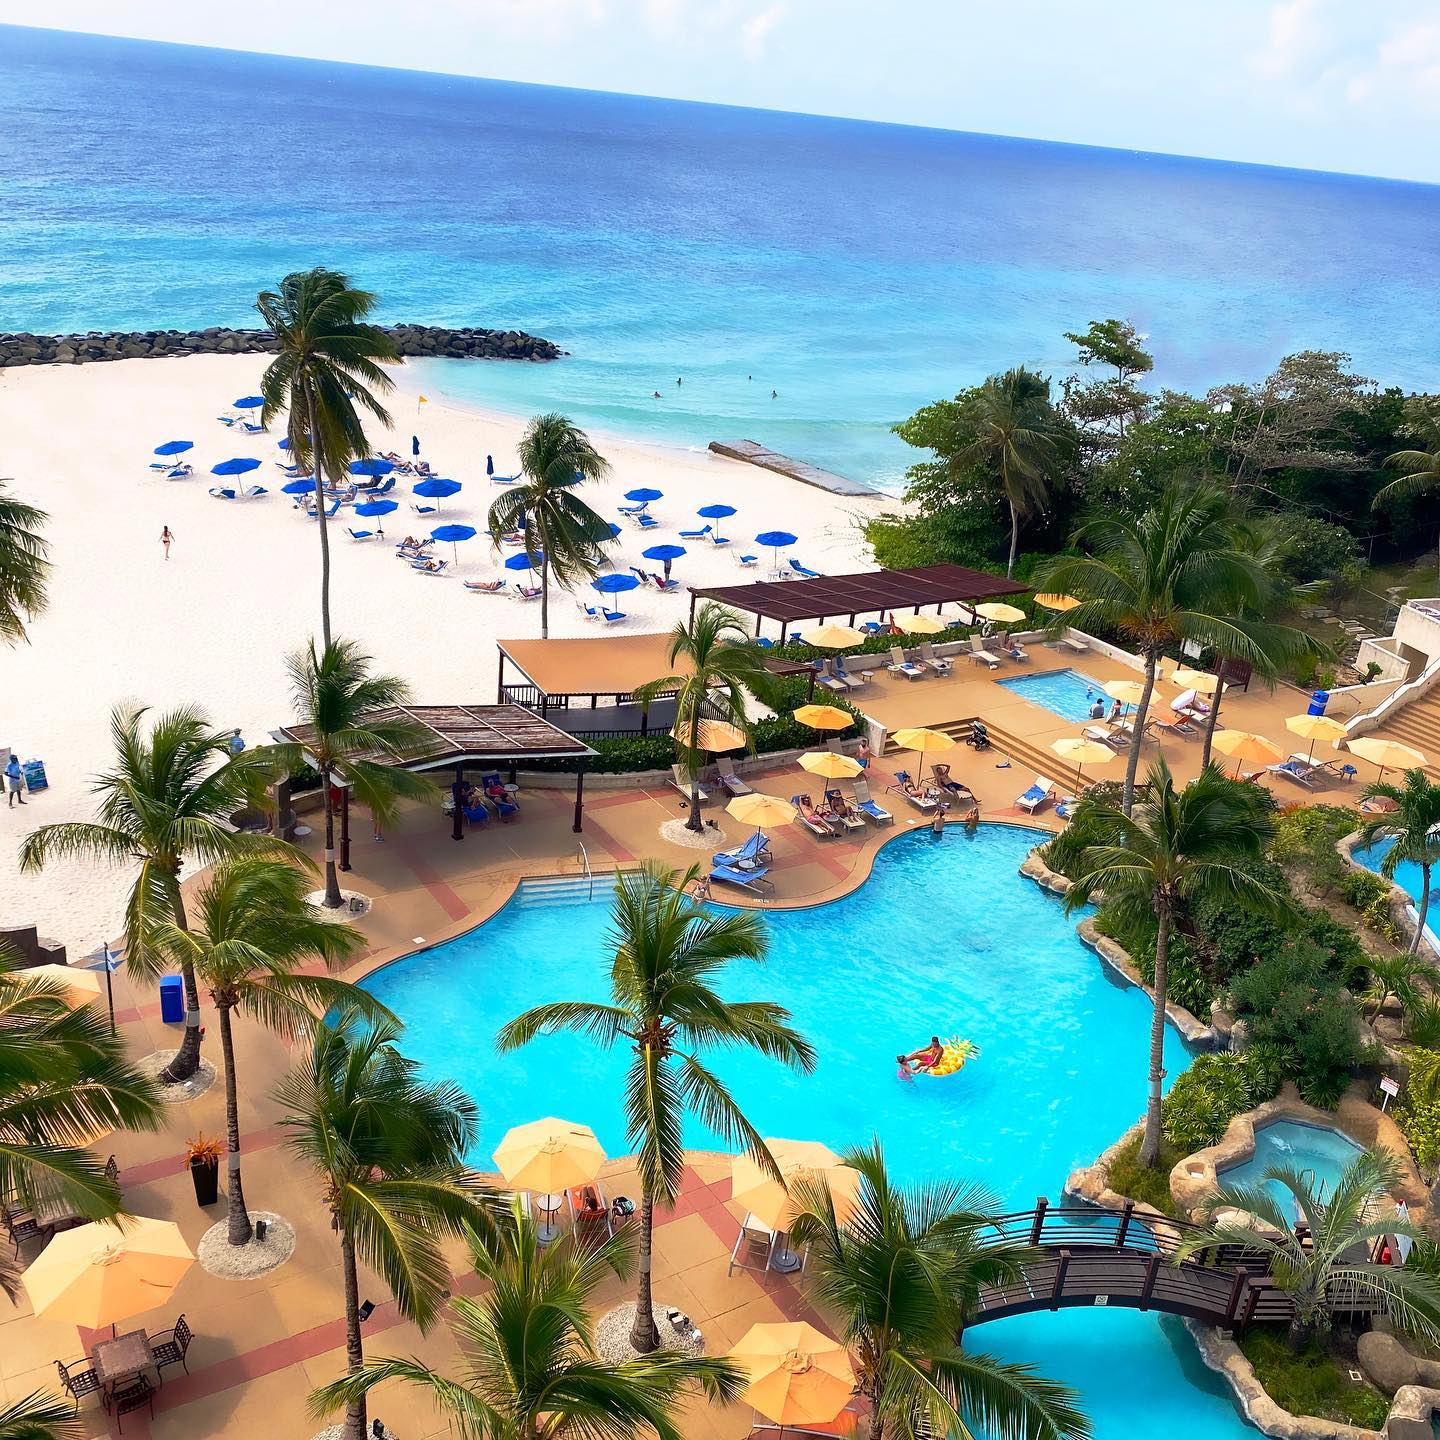 Why Visit Barbados for a Vacation?